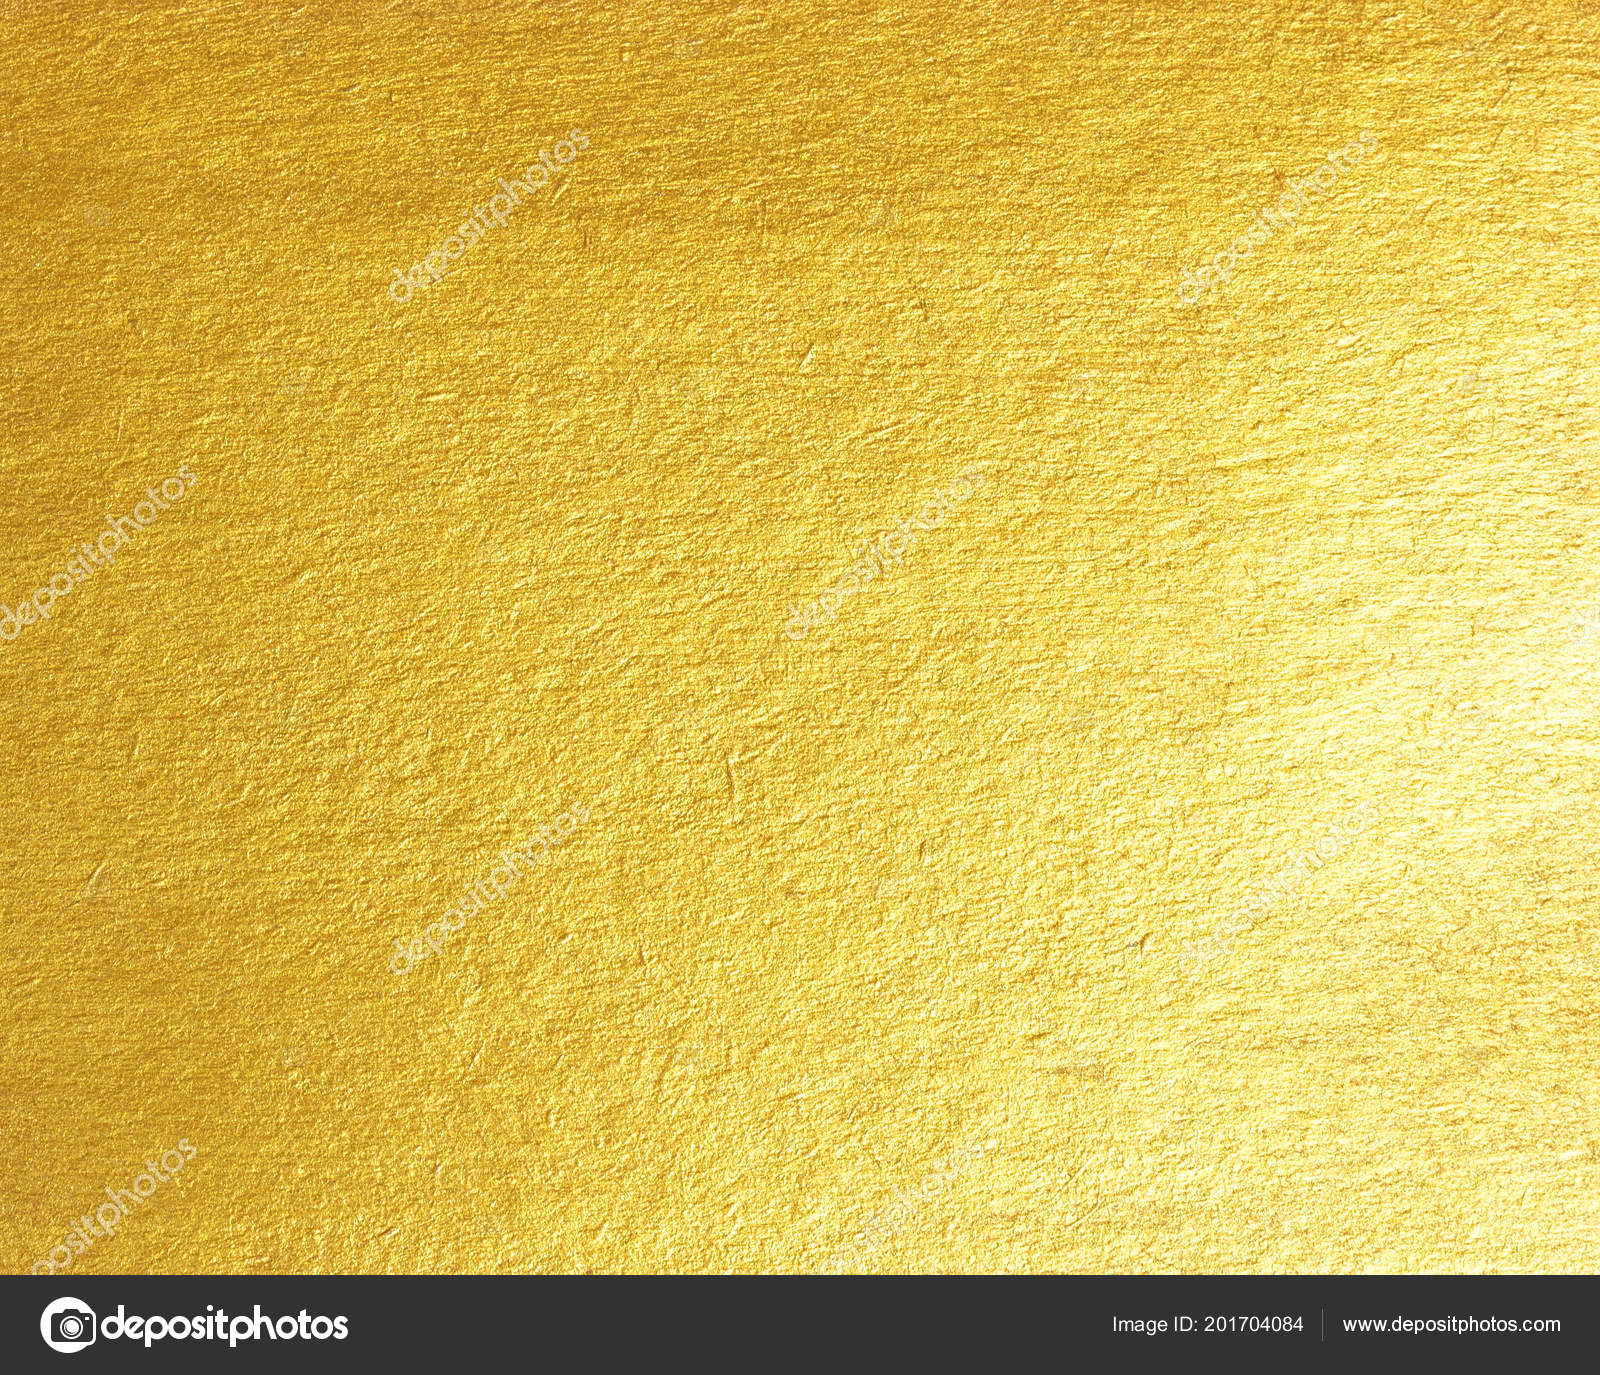 Details 100 gold paper background - Abzlocal.mx